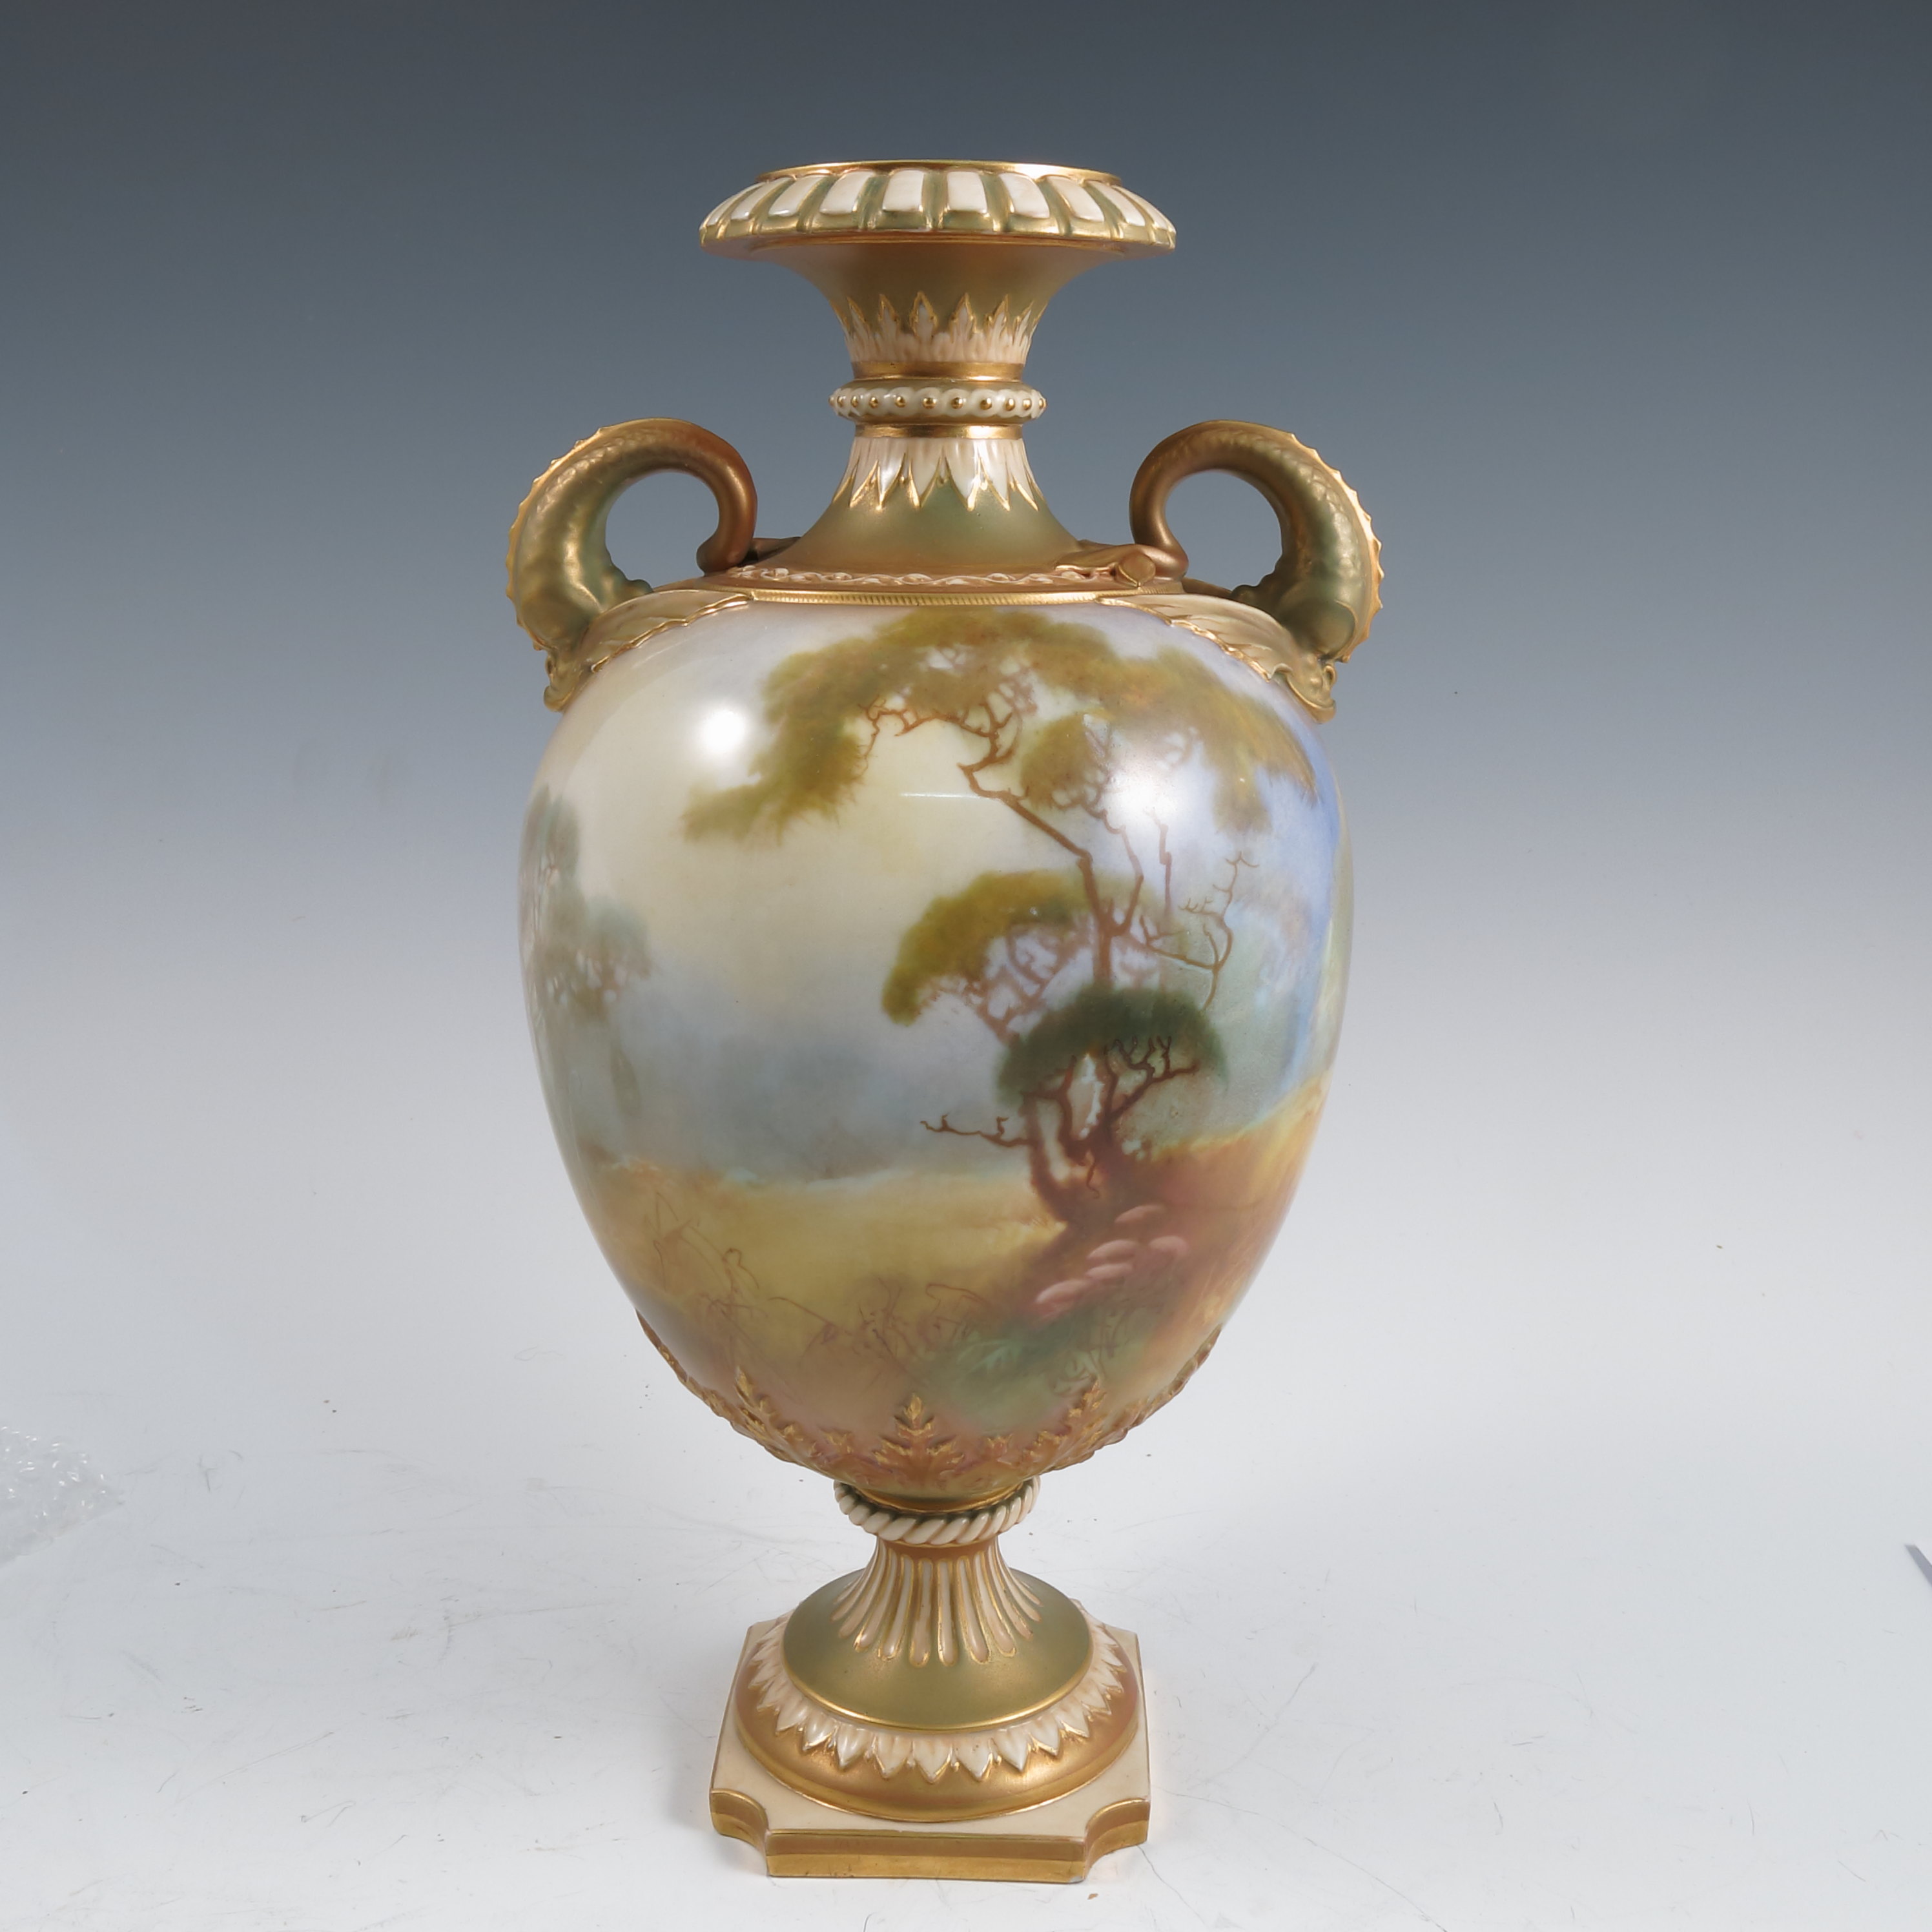 A Royal Worcester vase, decorated all around with storks in a river landscape by W Powell, having - Image 5 of 5